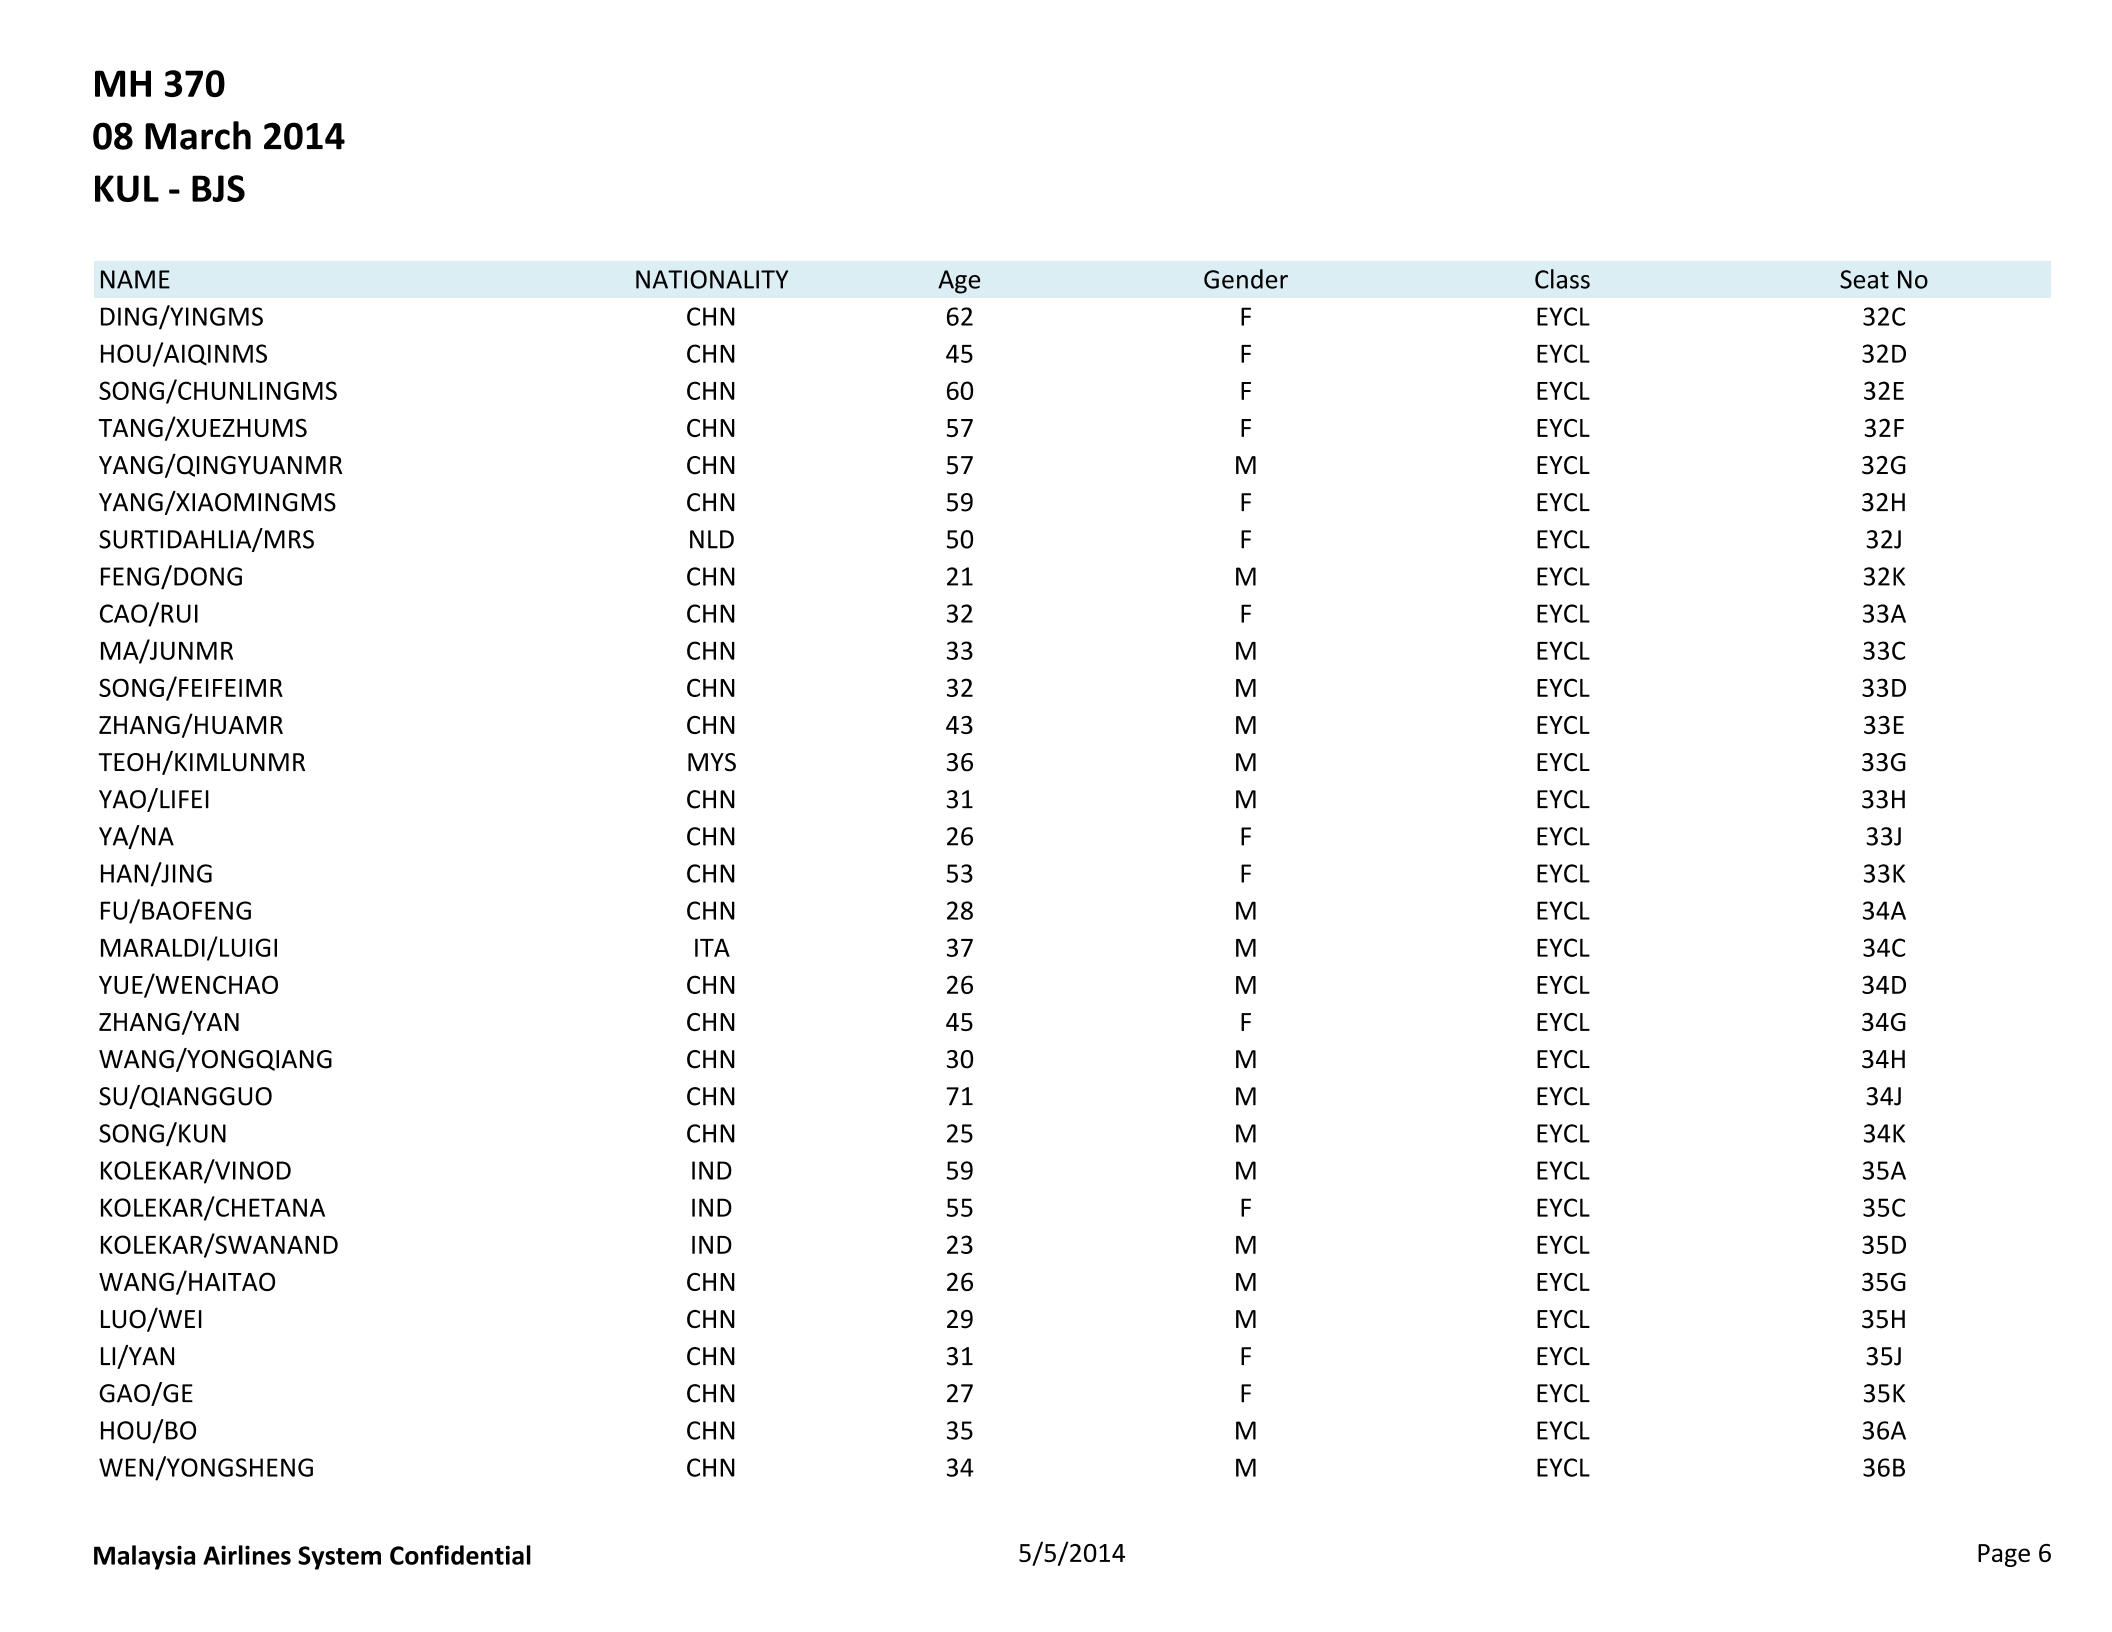 Malaysia Airlines Flight MH370 Passenger Manifest 5 May 2014 Page 6